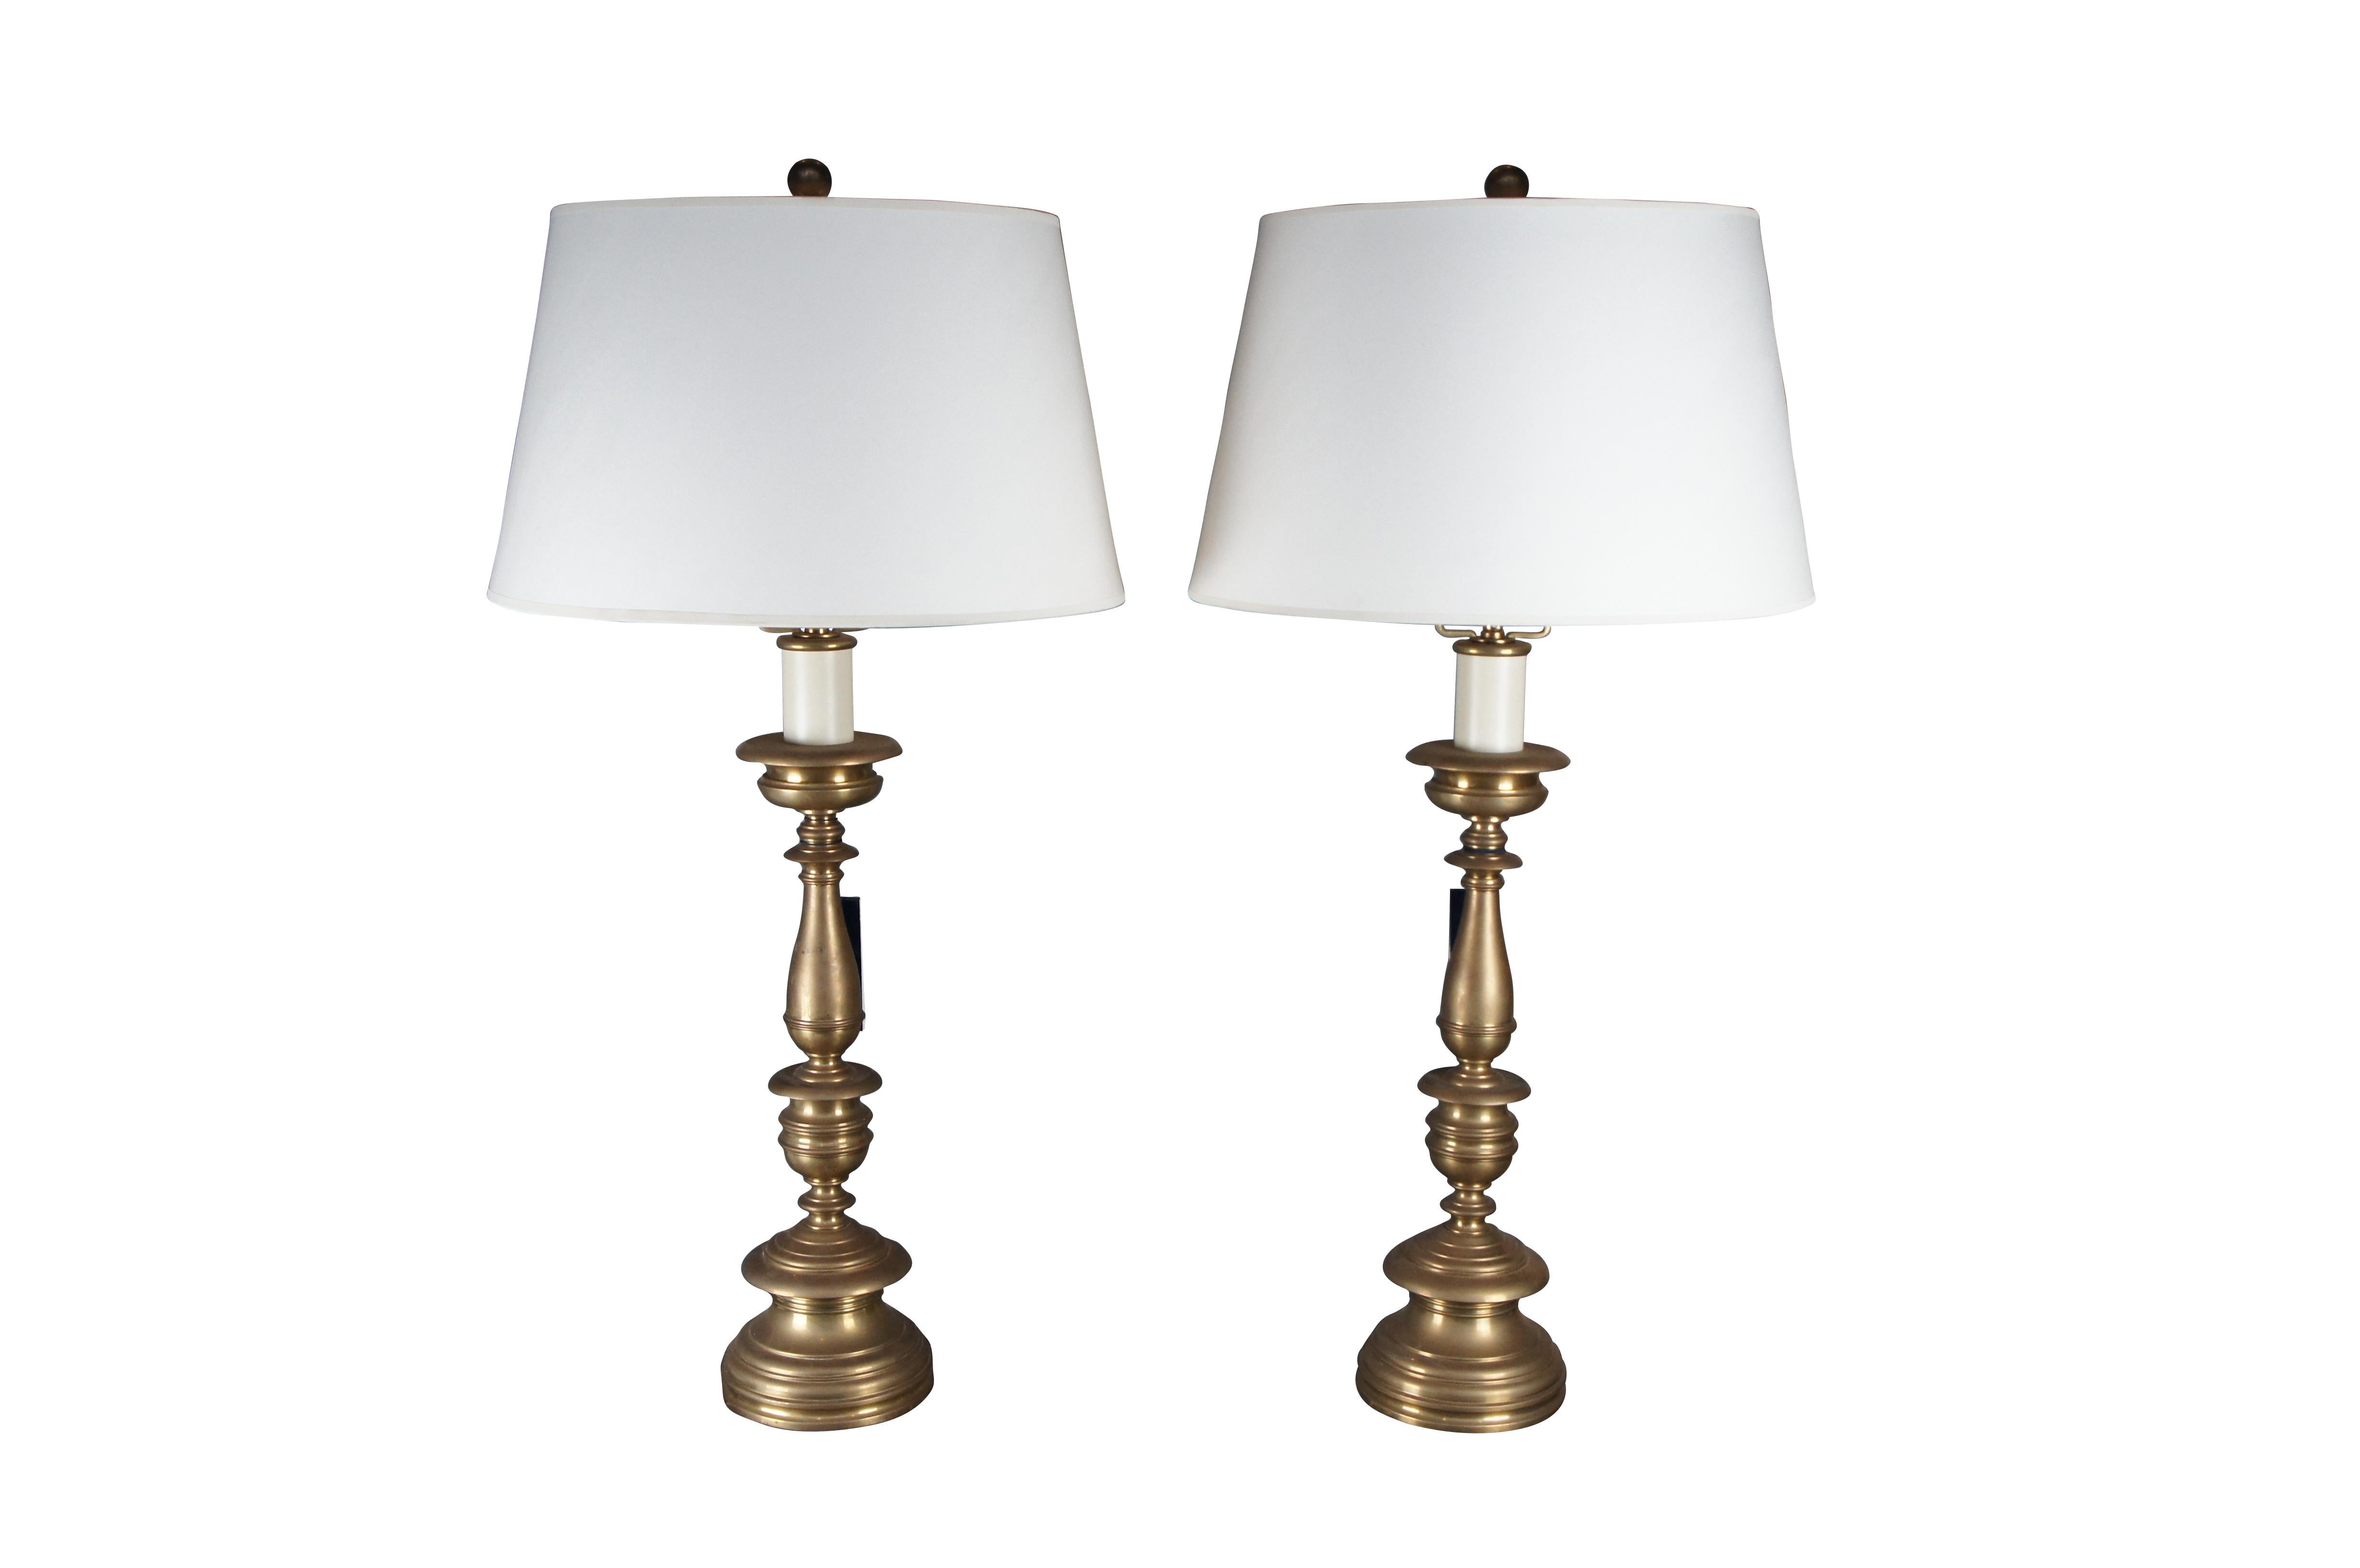 2 Ralph Lauren Tudor Altar Candlestick Adjustable Brass Table Lamps Shades Pair In Good Condition For Sale In Dayton, OH